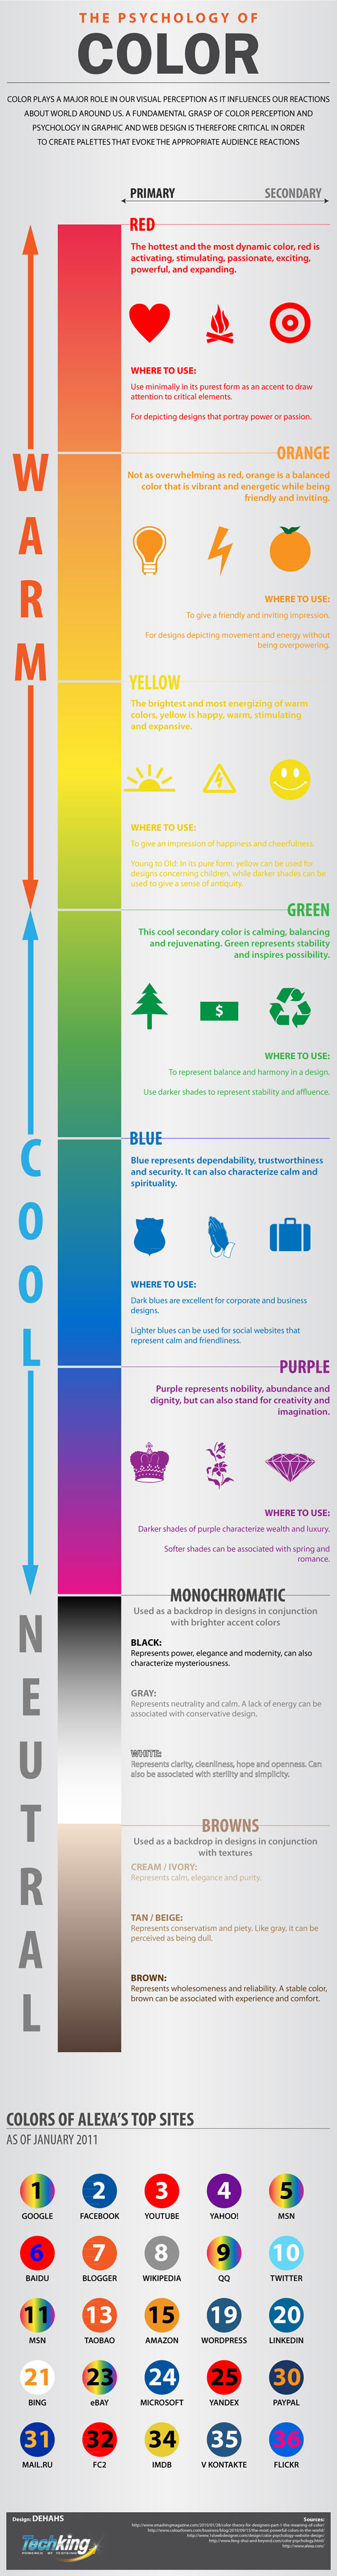 The Psychology of Color – Must See for Web Designers - Infographic